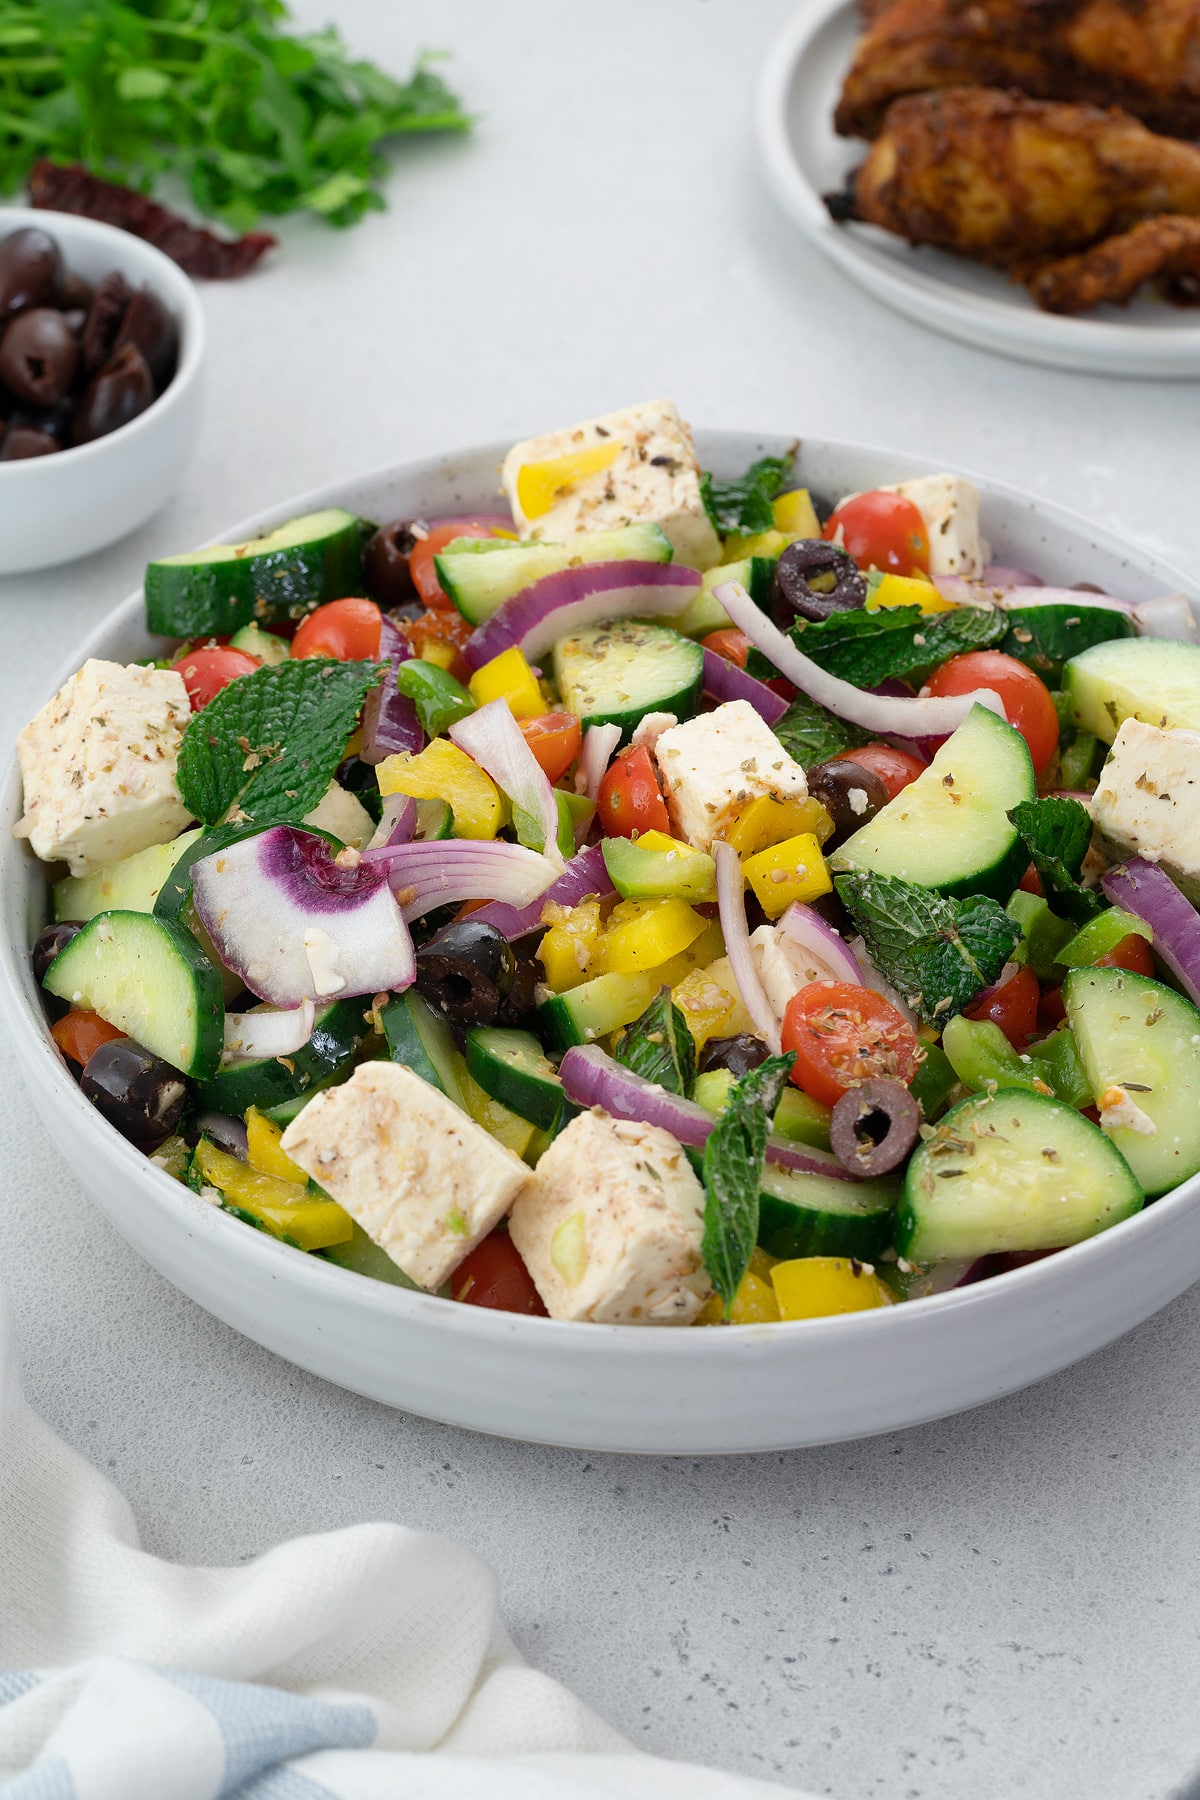 A colorful Greek Salad made of cucumber, green and red bell pepper, feta cheese, kalamata olives, and mint leaves. The salad is placed in a white bowl on a white table. There are also chicken and olives in a plate and a cup.